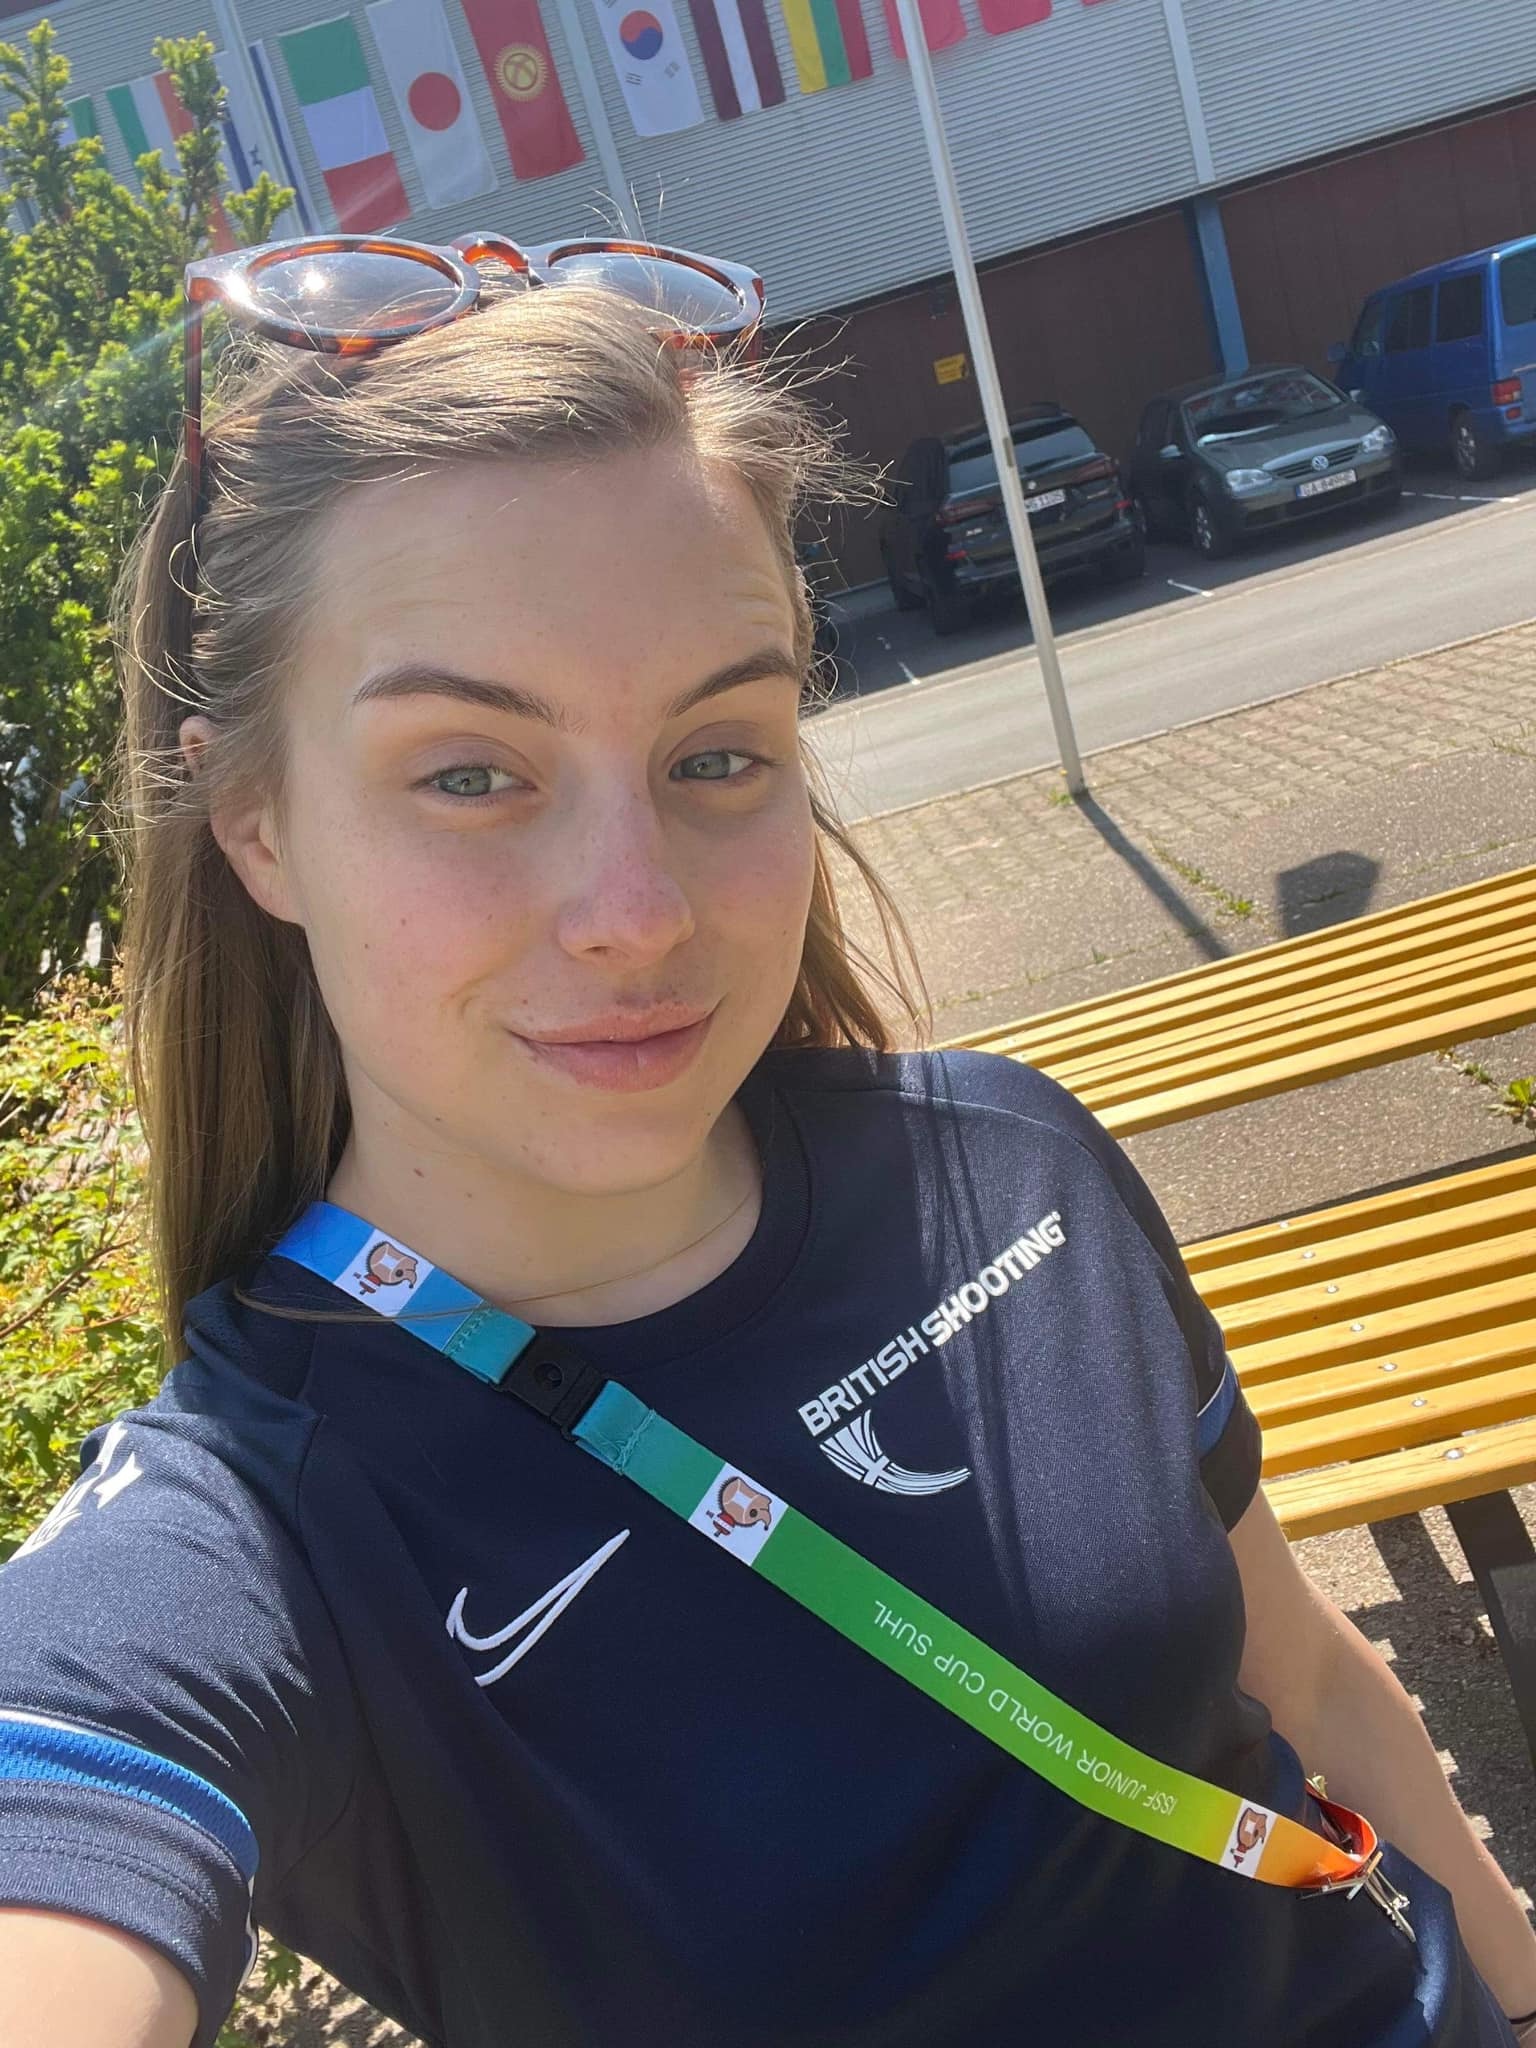 A young woman smiles at the camera as she takes a selfie. Her blue t-shirt features the British Shooting logo. A lanyard across her chest reads "ISSF Junior World Cup Suhl".